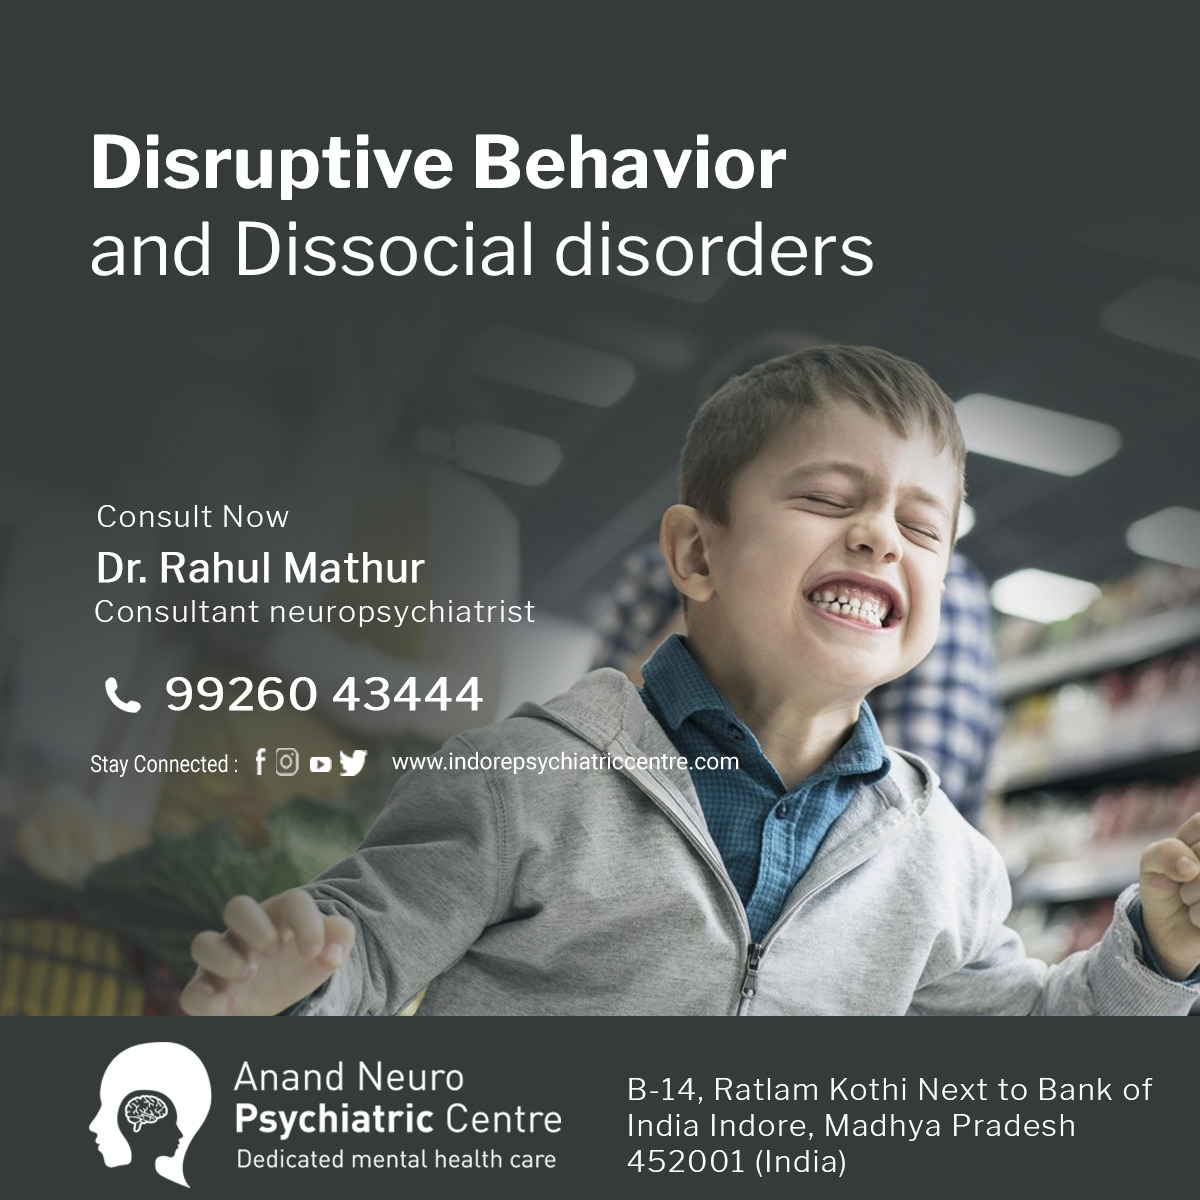 Disruptive Behavior and Dissocial Disorders, Symptoms, Causes, Treatment